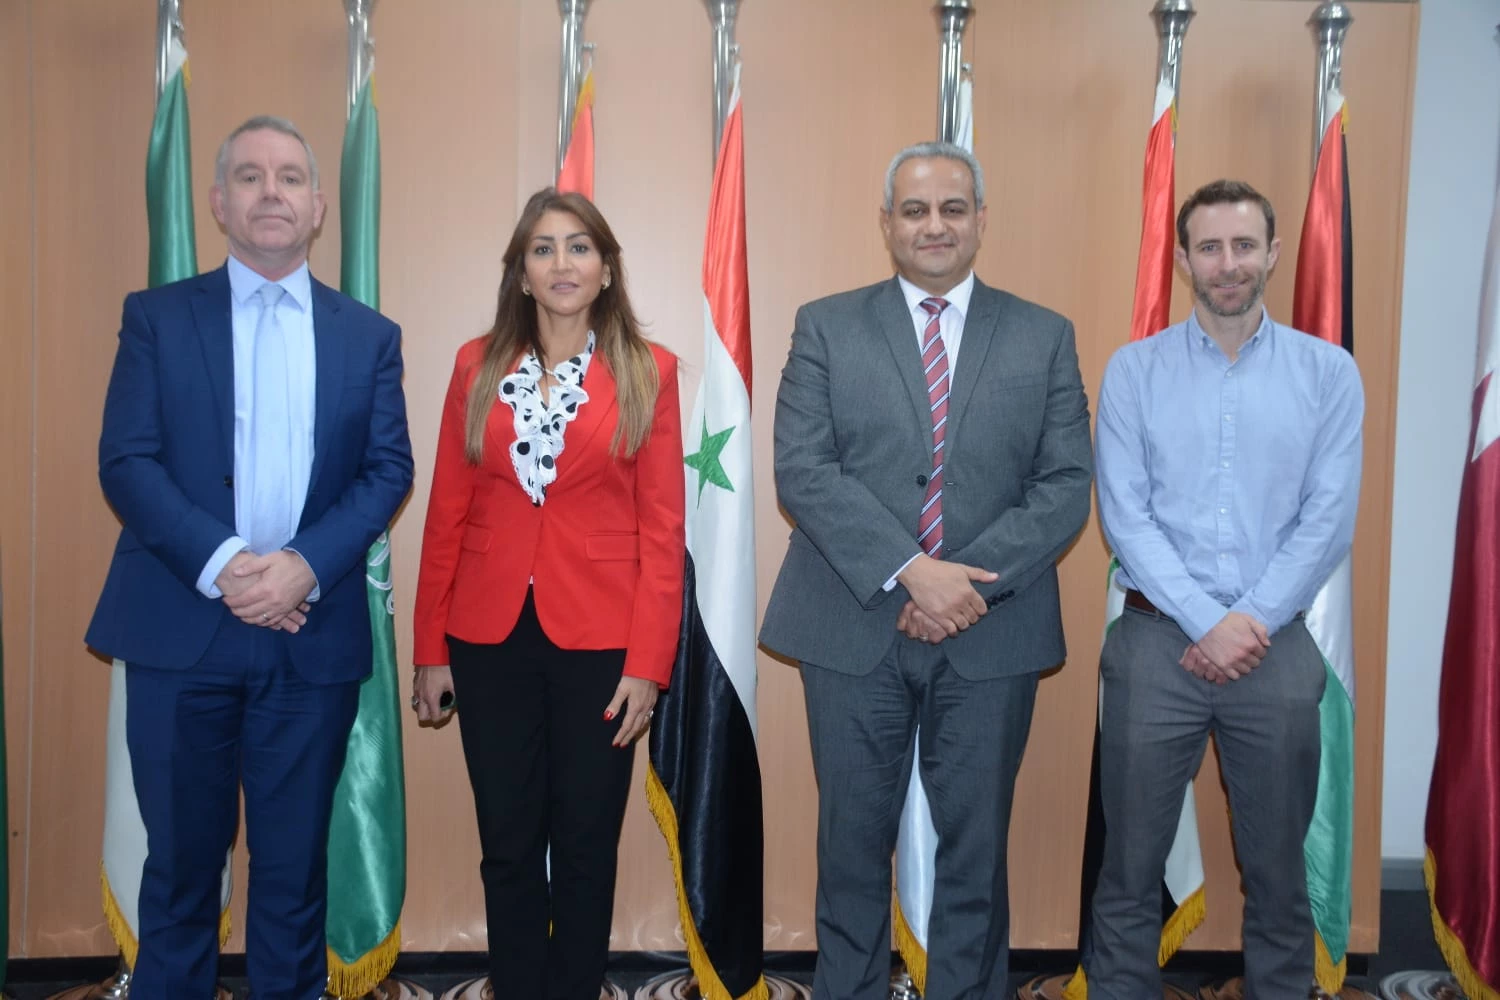 The Arab Academy for Science, Technology, and Maritime Transport (AASTMT) at Smart Village Campus welcomed a delegation from the University of Central Lancashire (UCLan)4